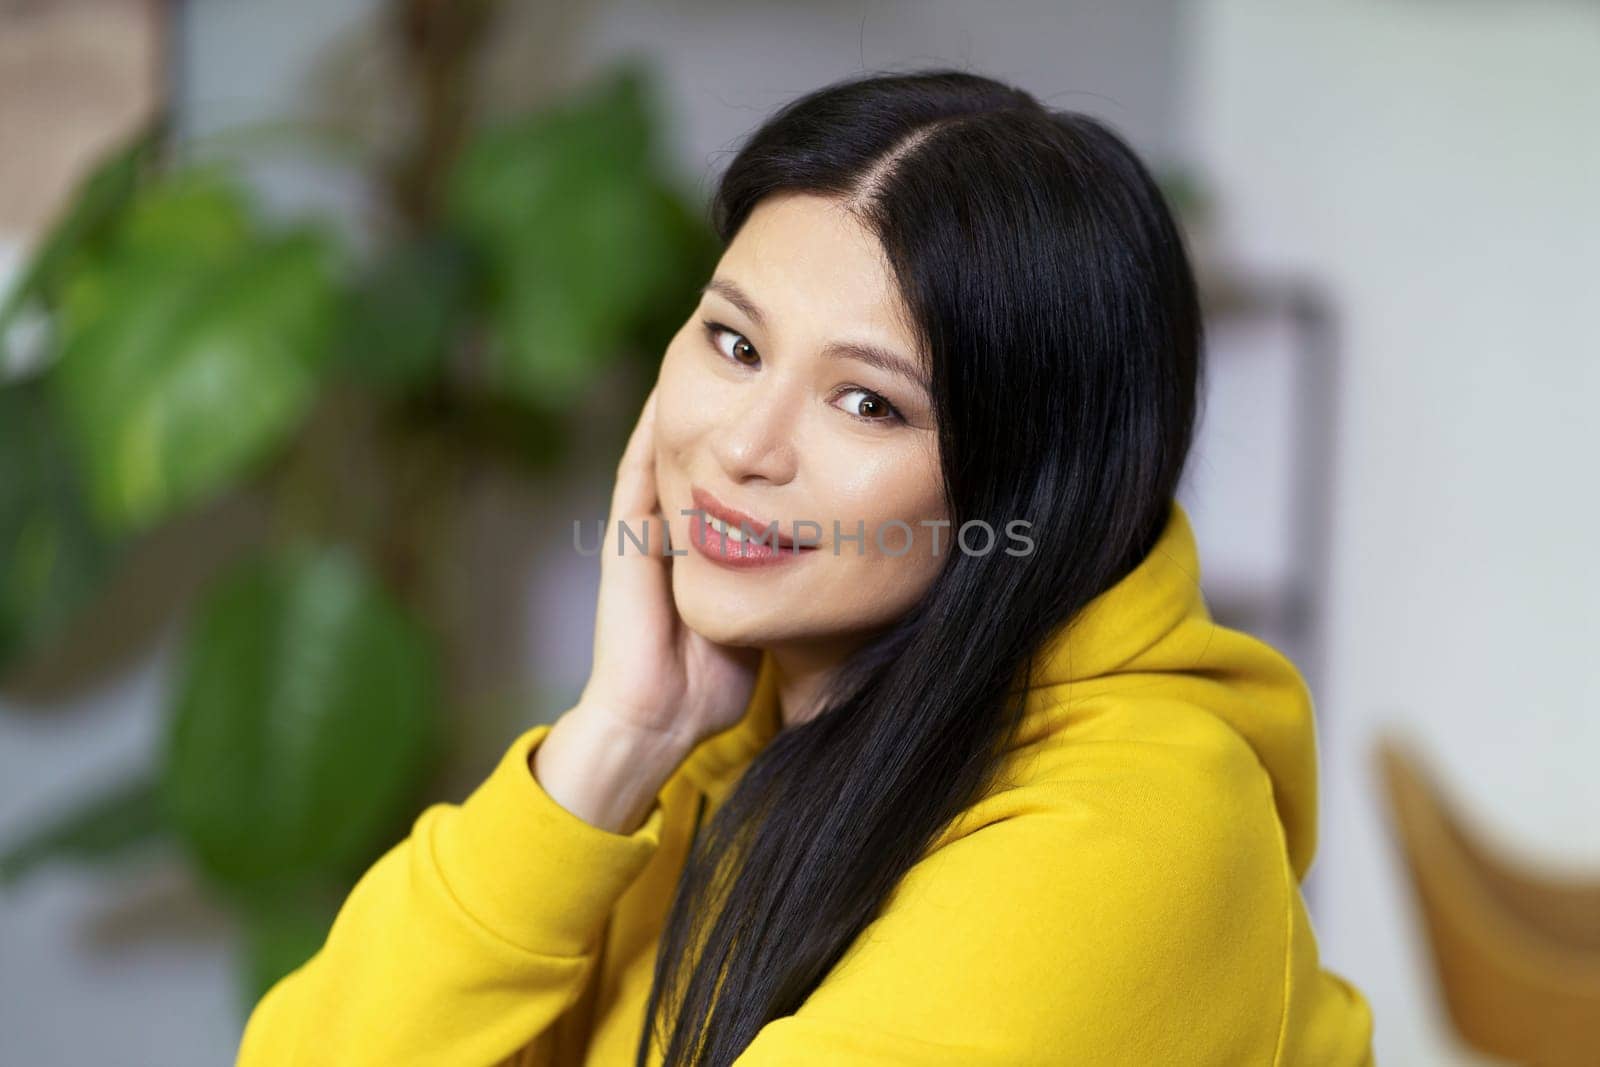 Pretty middle-aged Asian woman with healthy, glowing facial skin and well-groomed hair, promoting concept of healthy lifestyle. Woman radiates confidence, vitality, and well-being, in harmony with nature and her surroundings. High quality photo